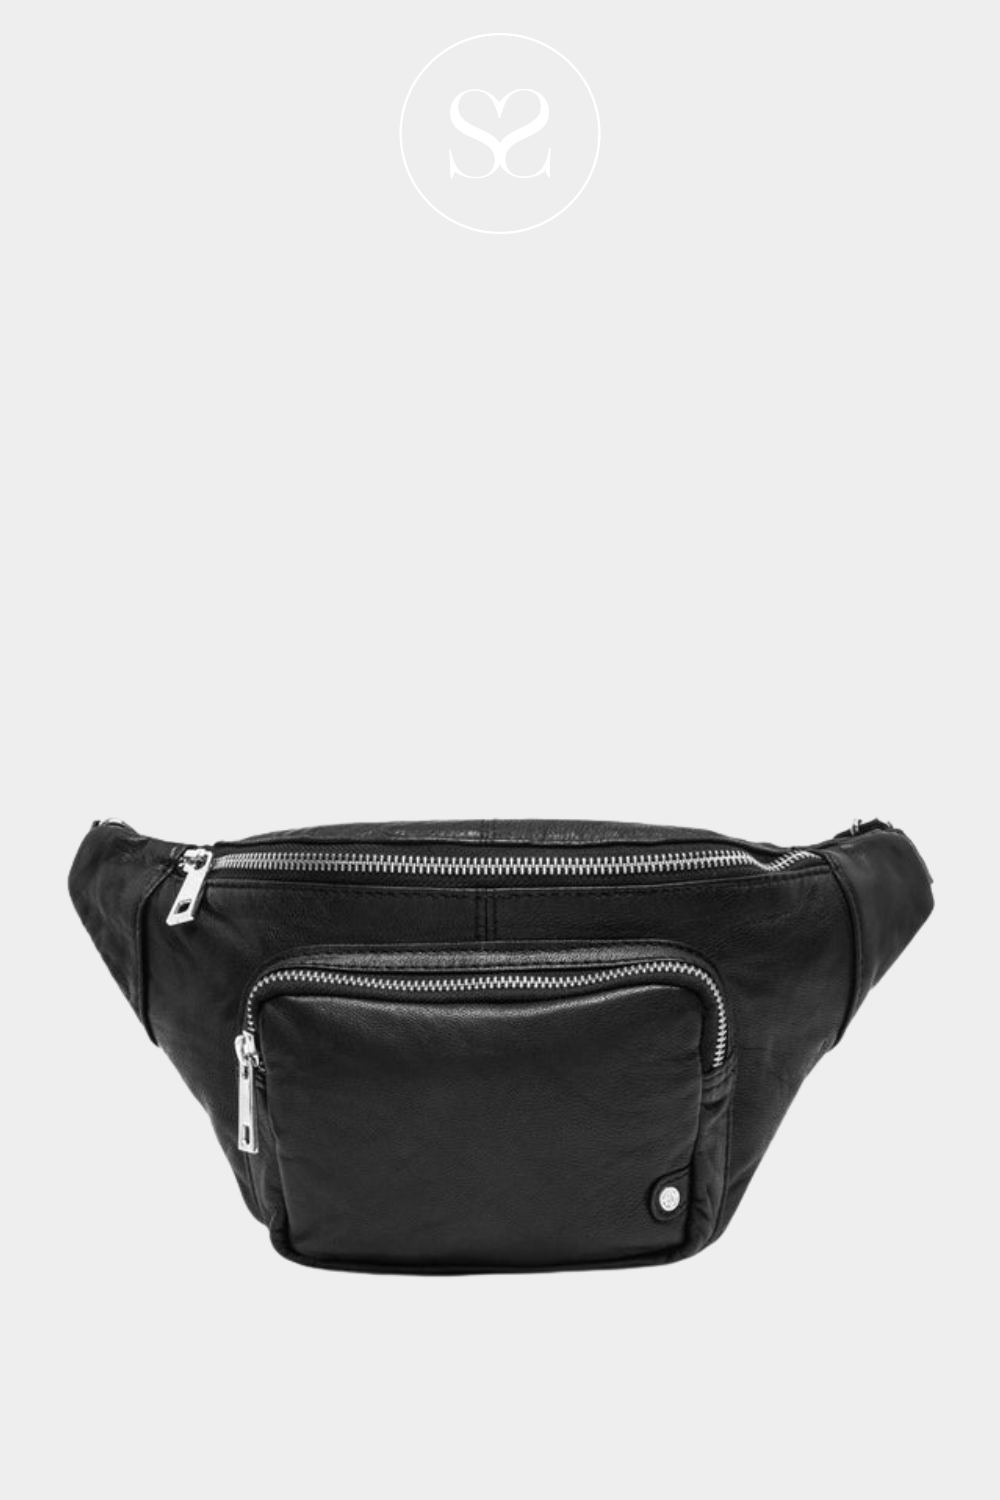 DEPECHE 13396 LEATHER BLACK BUMBAG WITH SILVER HARDWARE AND SMALL FRONT POCKET